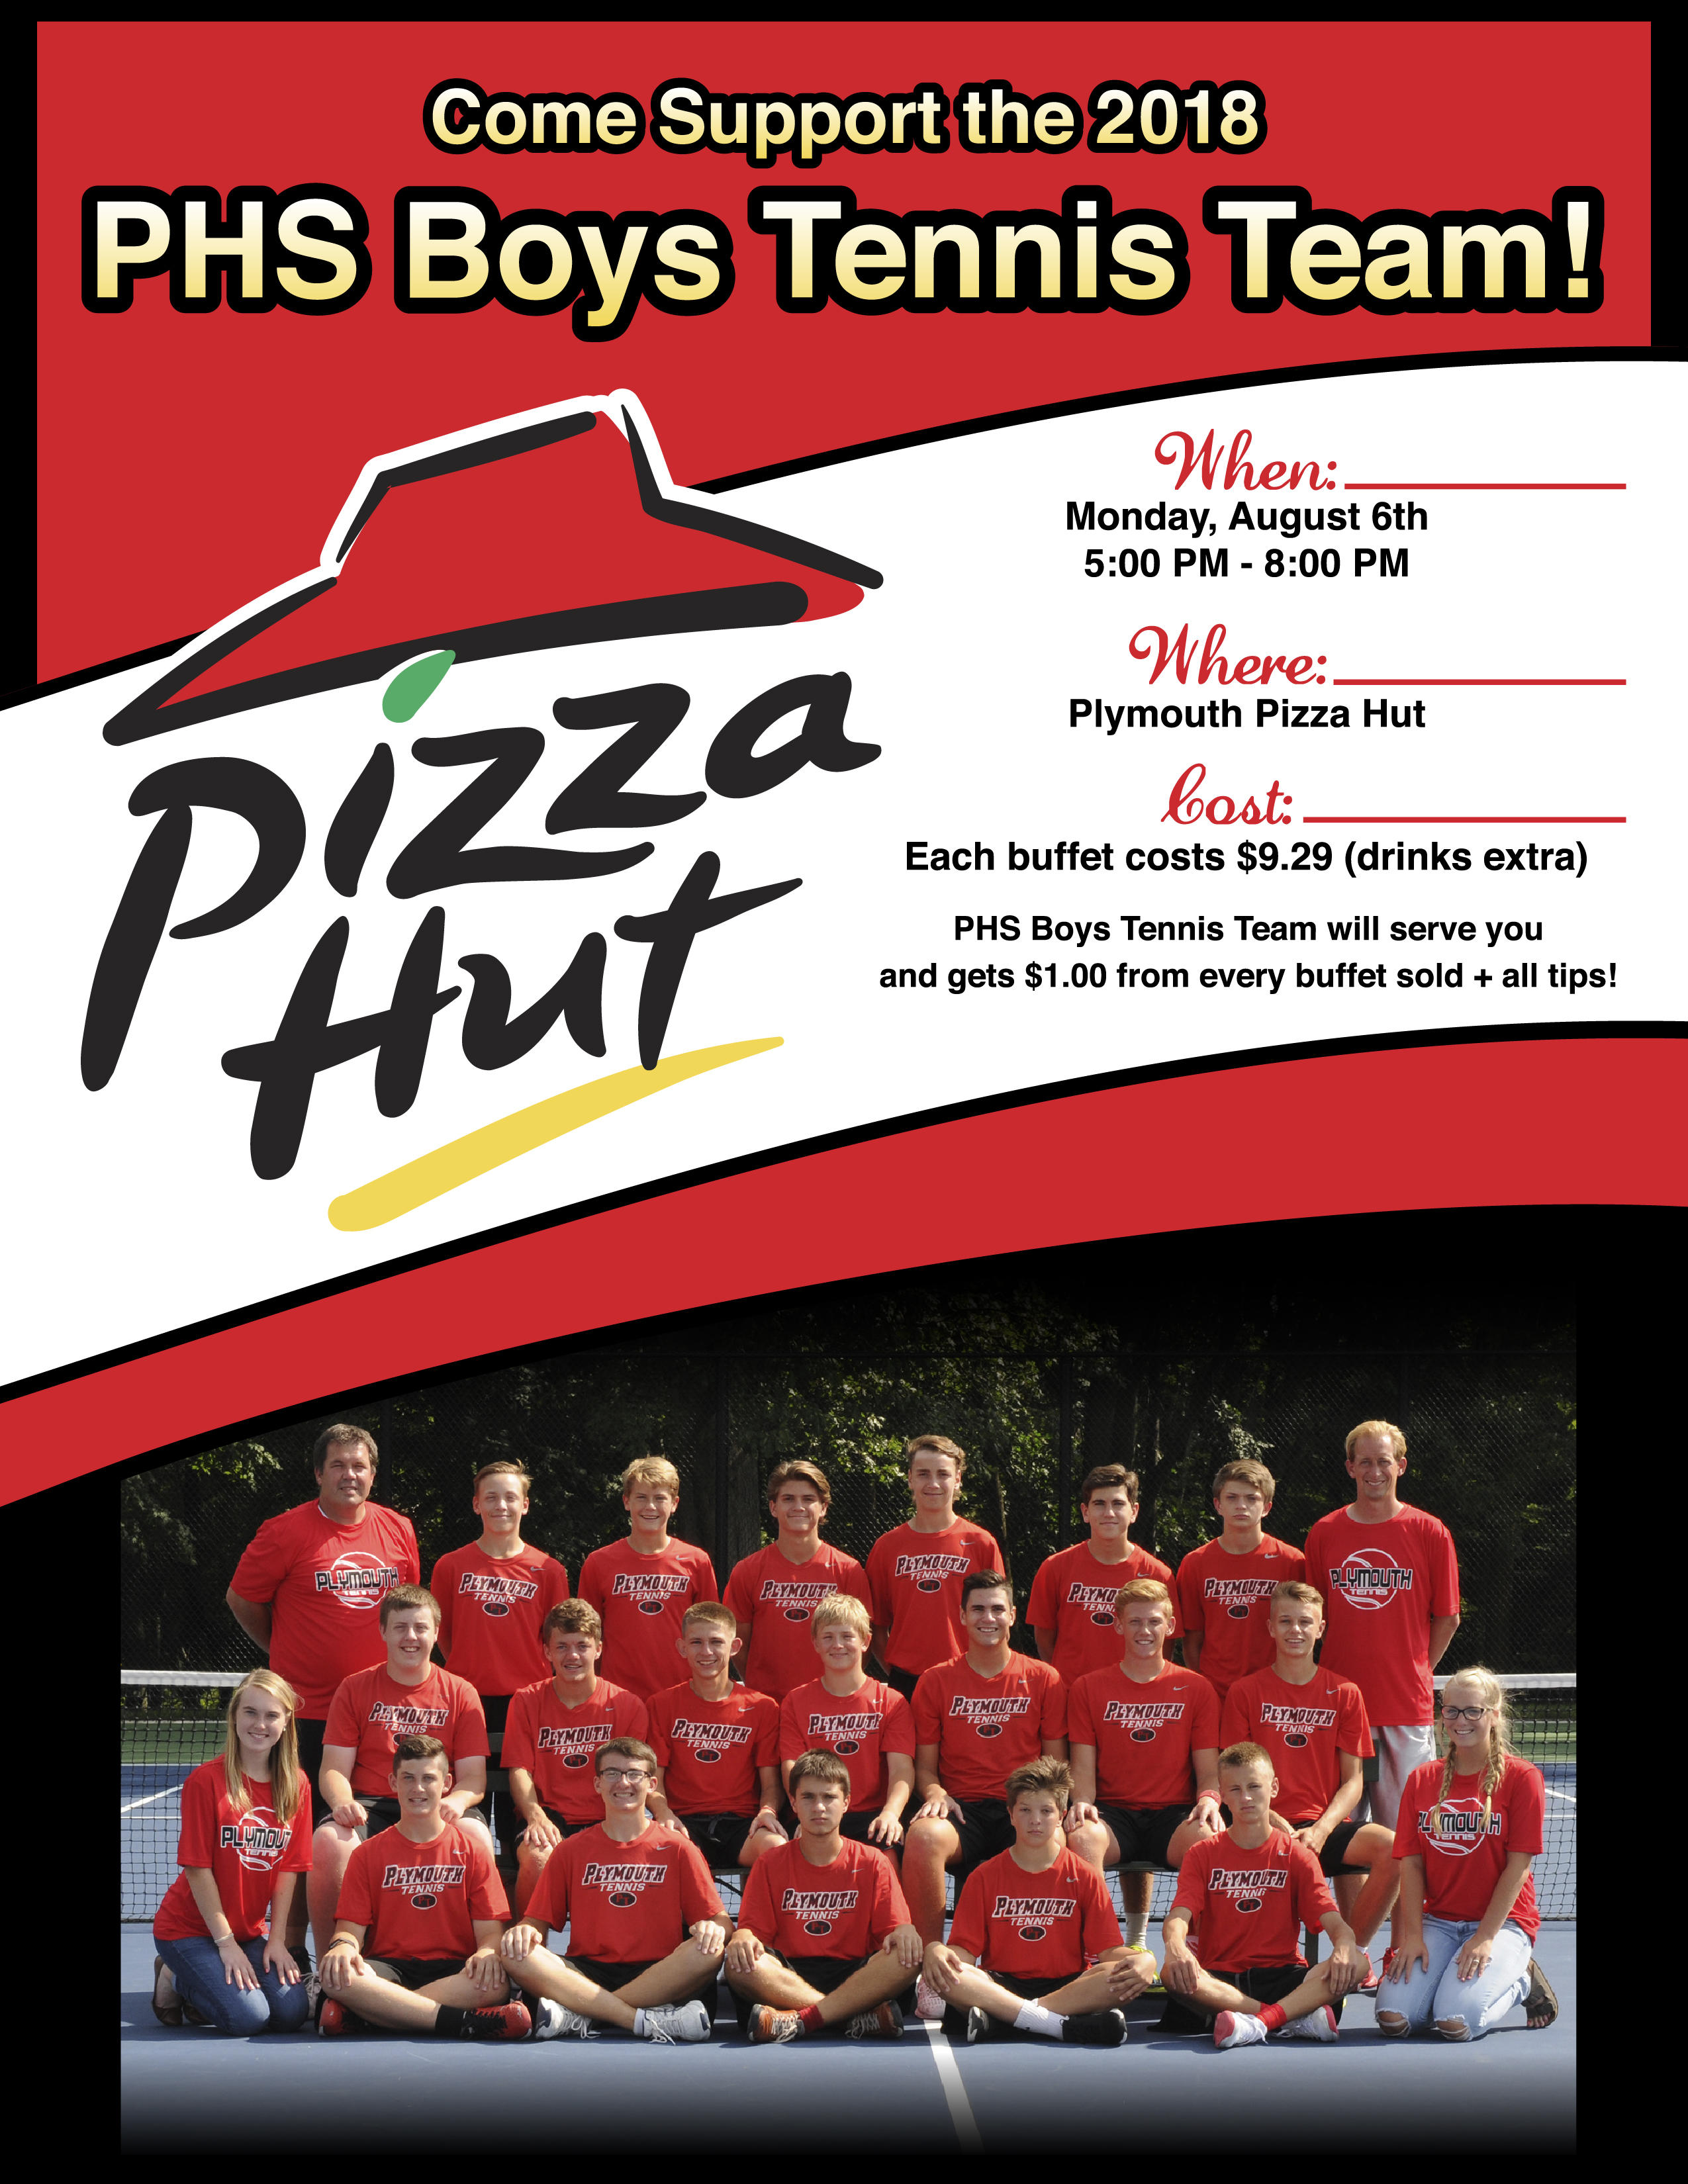 Come Support the 2018 Boys Tennis team-When: Monday, August 6th, 5-8 p.m.-Where: Plymouth Pizza Hut-Cost: Each buffet costs $9.29 (drinks extra)-PHS Boys Tennis Team will serve you and gets $1.00 from every buffet sold and all tips! Picture of tennis team and Pizza Hut logo